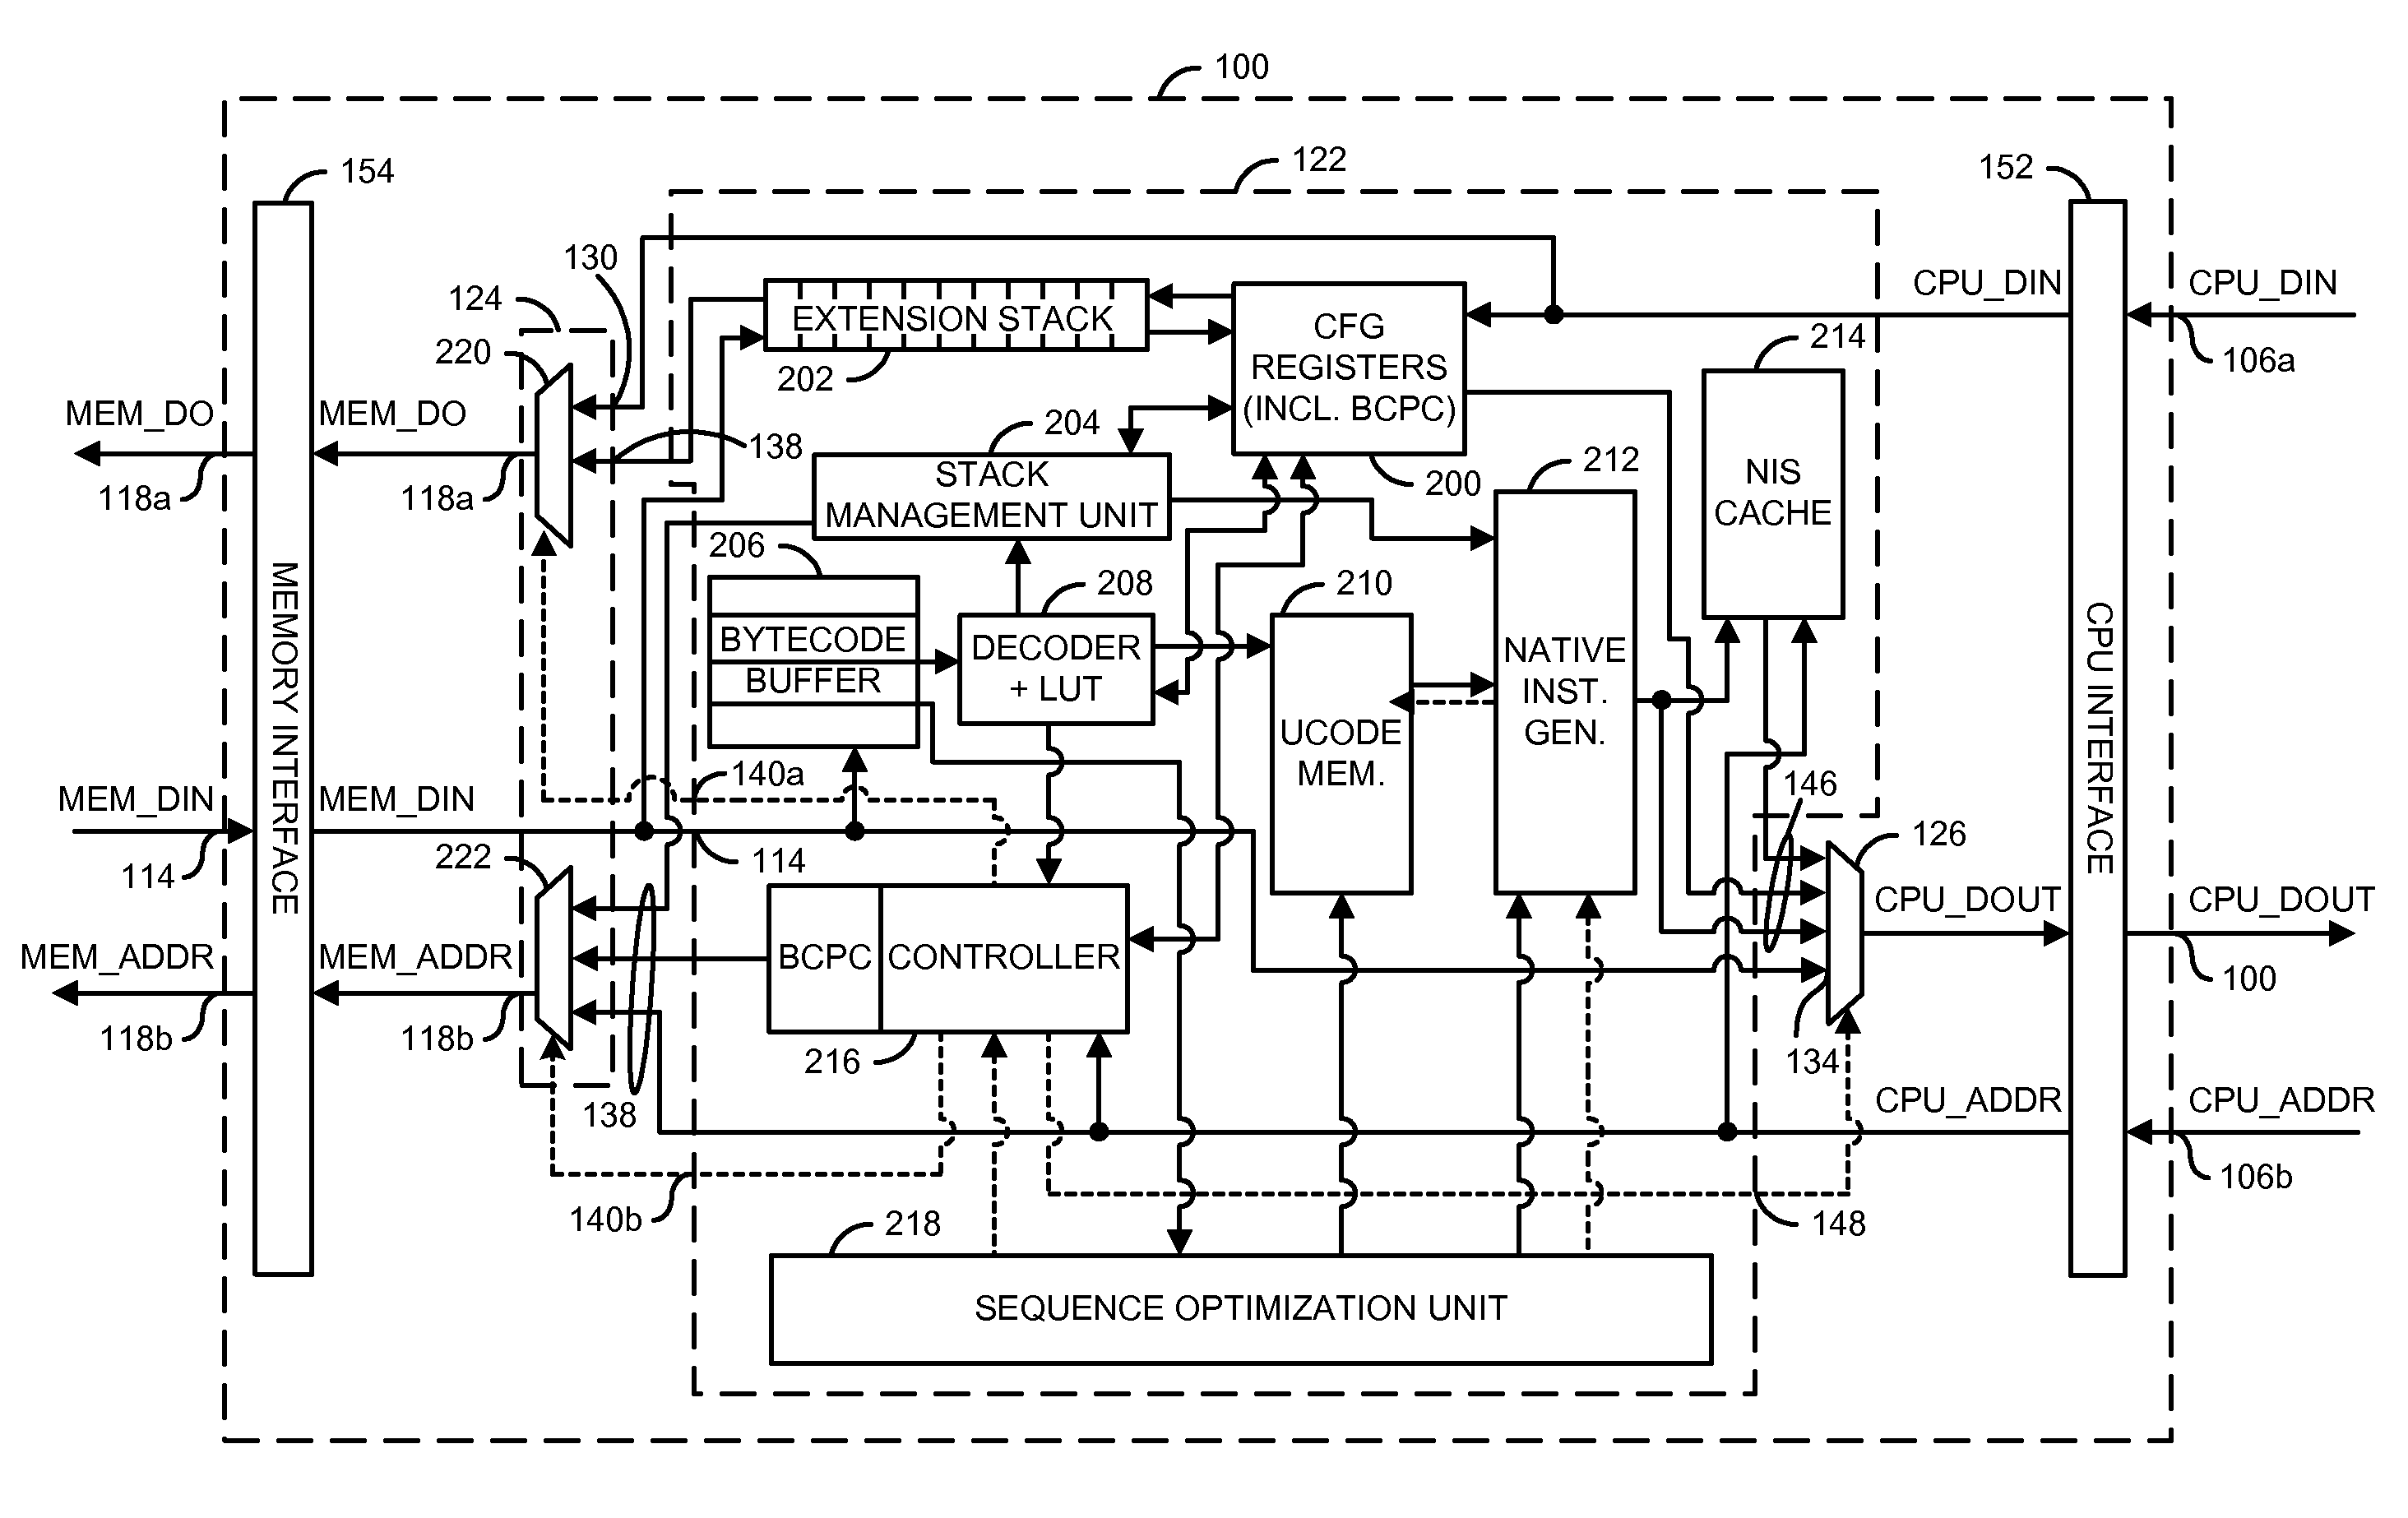 Microcode based hardware translator to support a multitude of processors